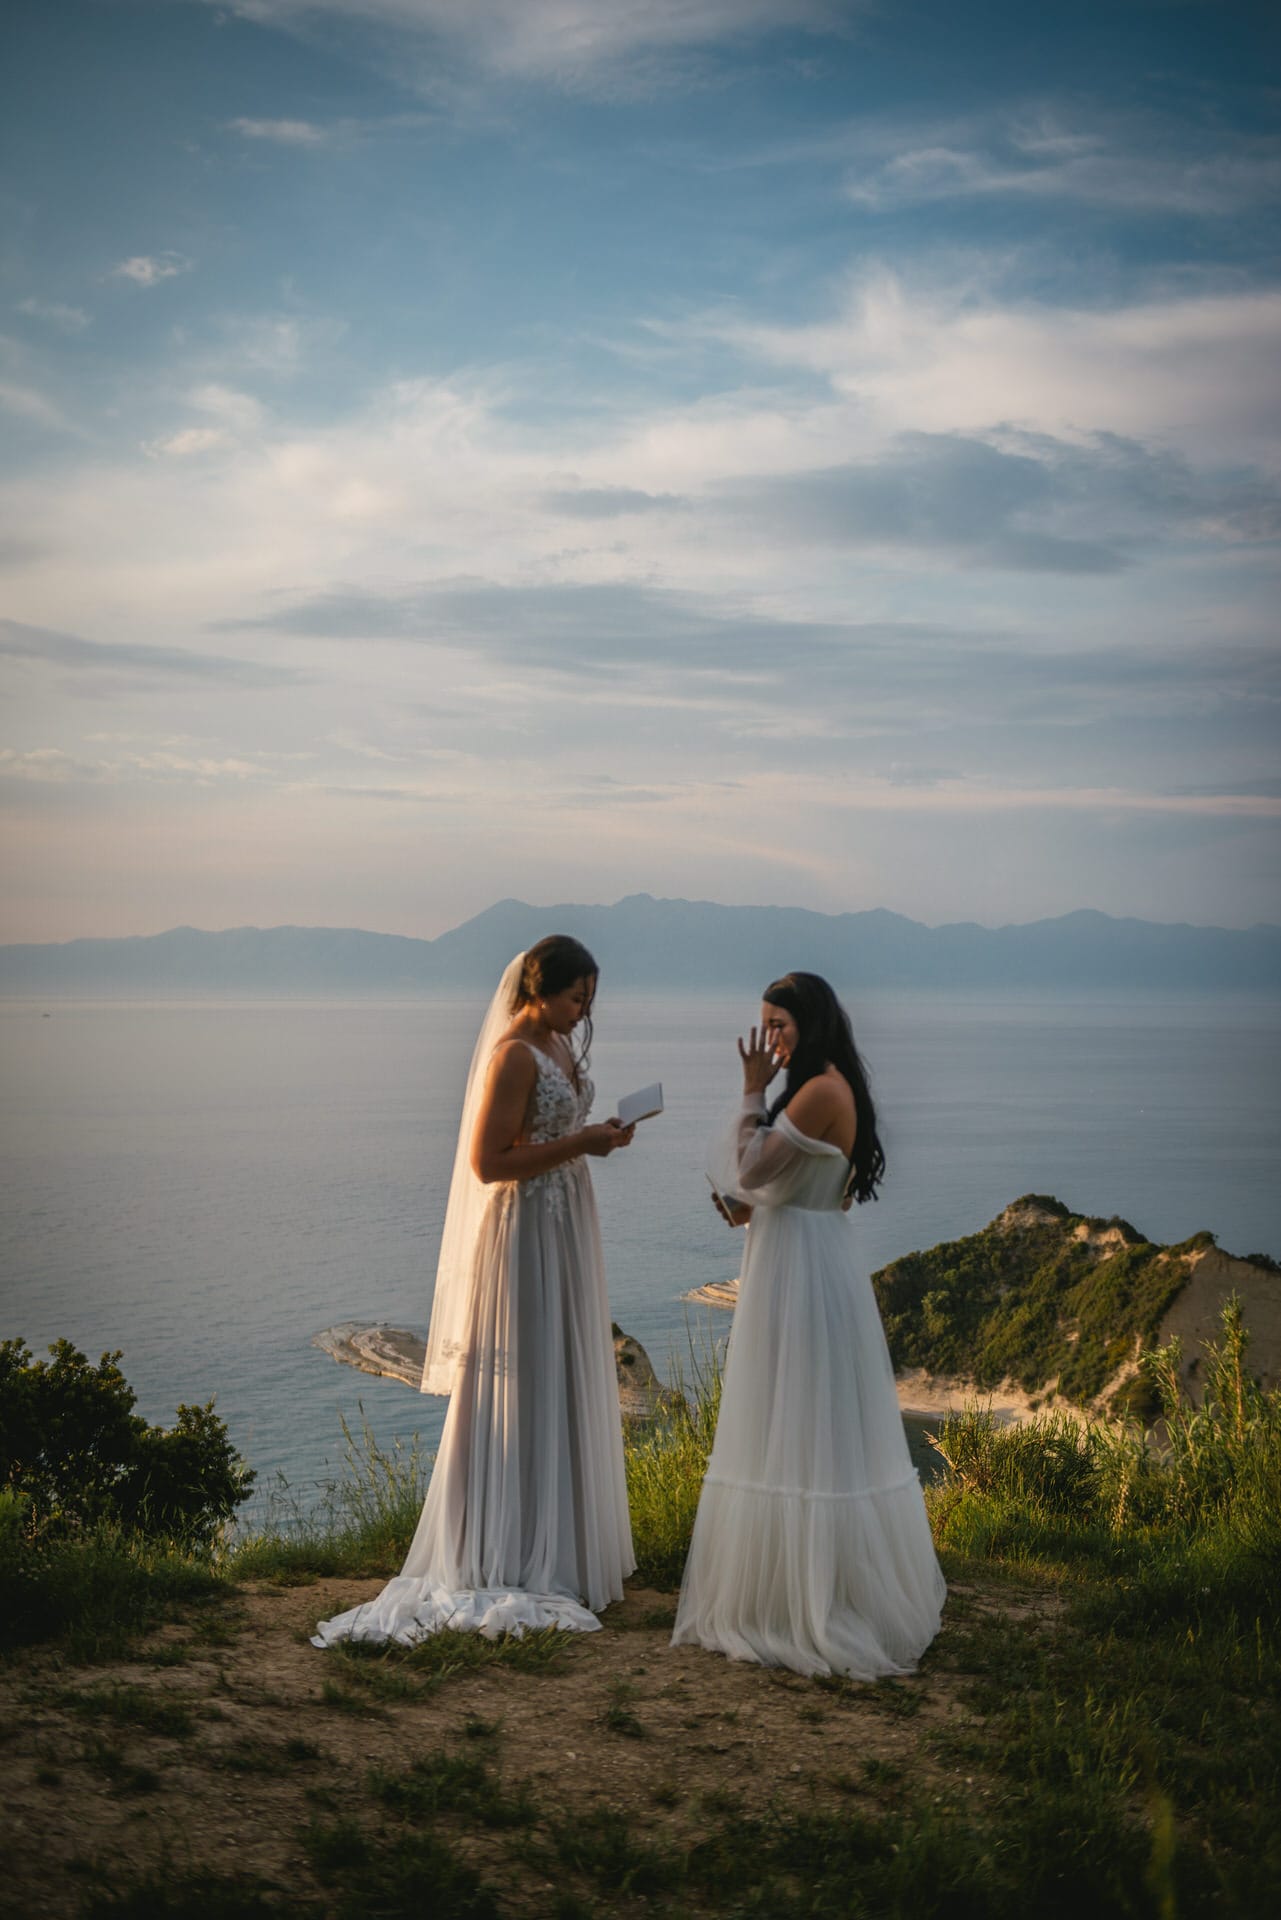 Love and promises exchanged under the Corfu sky during the ceremony.